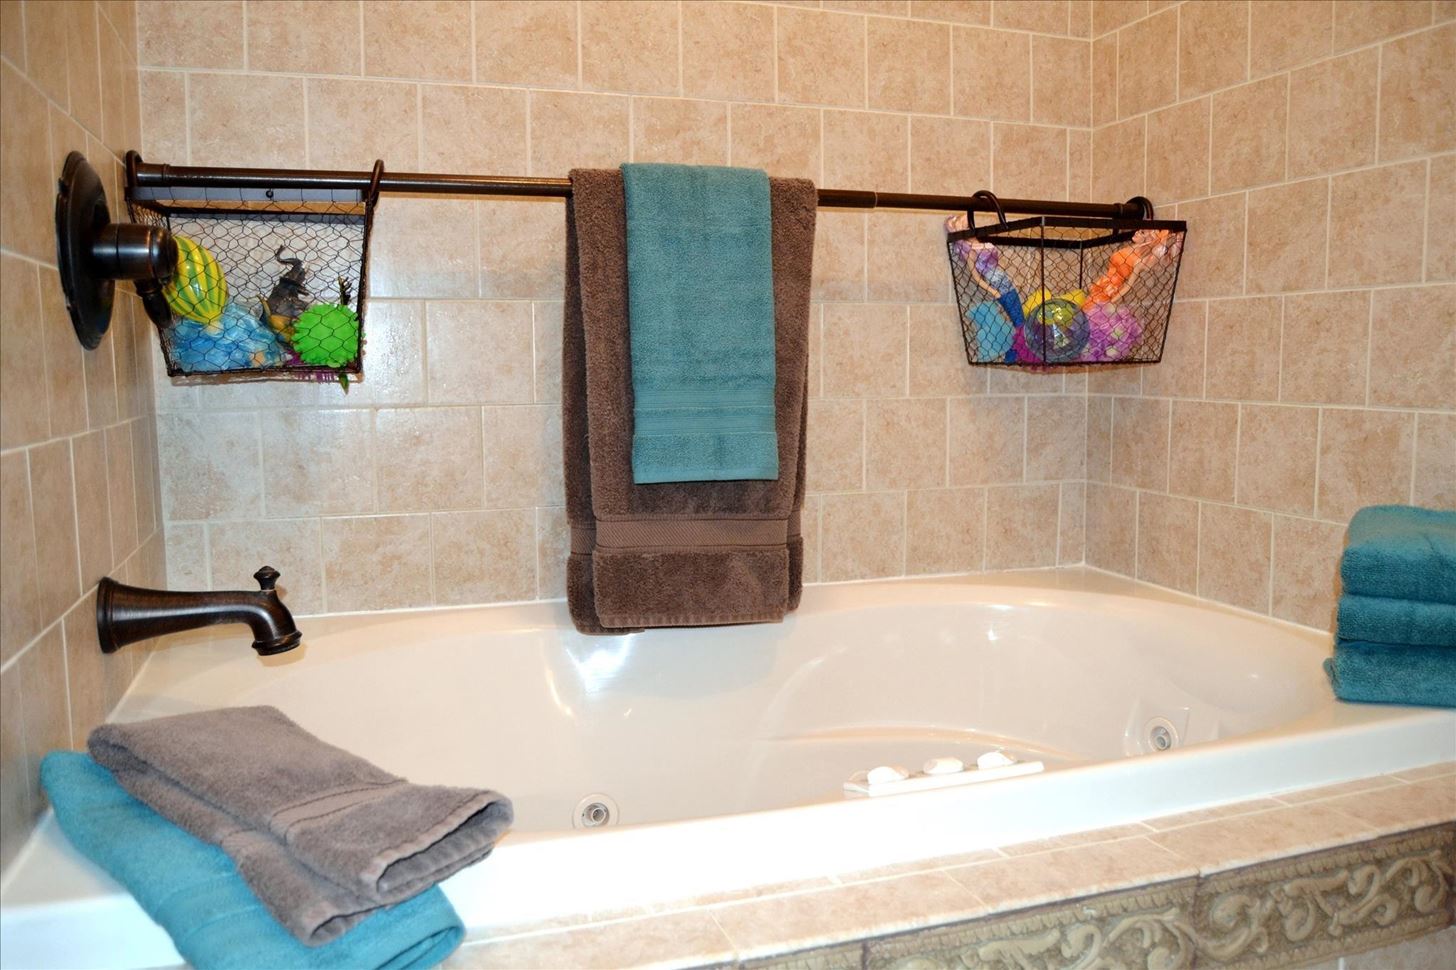 Use extra shower curtain rods increase bathroom storage more.w1456.jpg